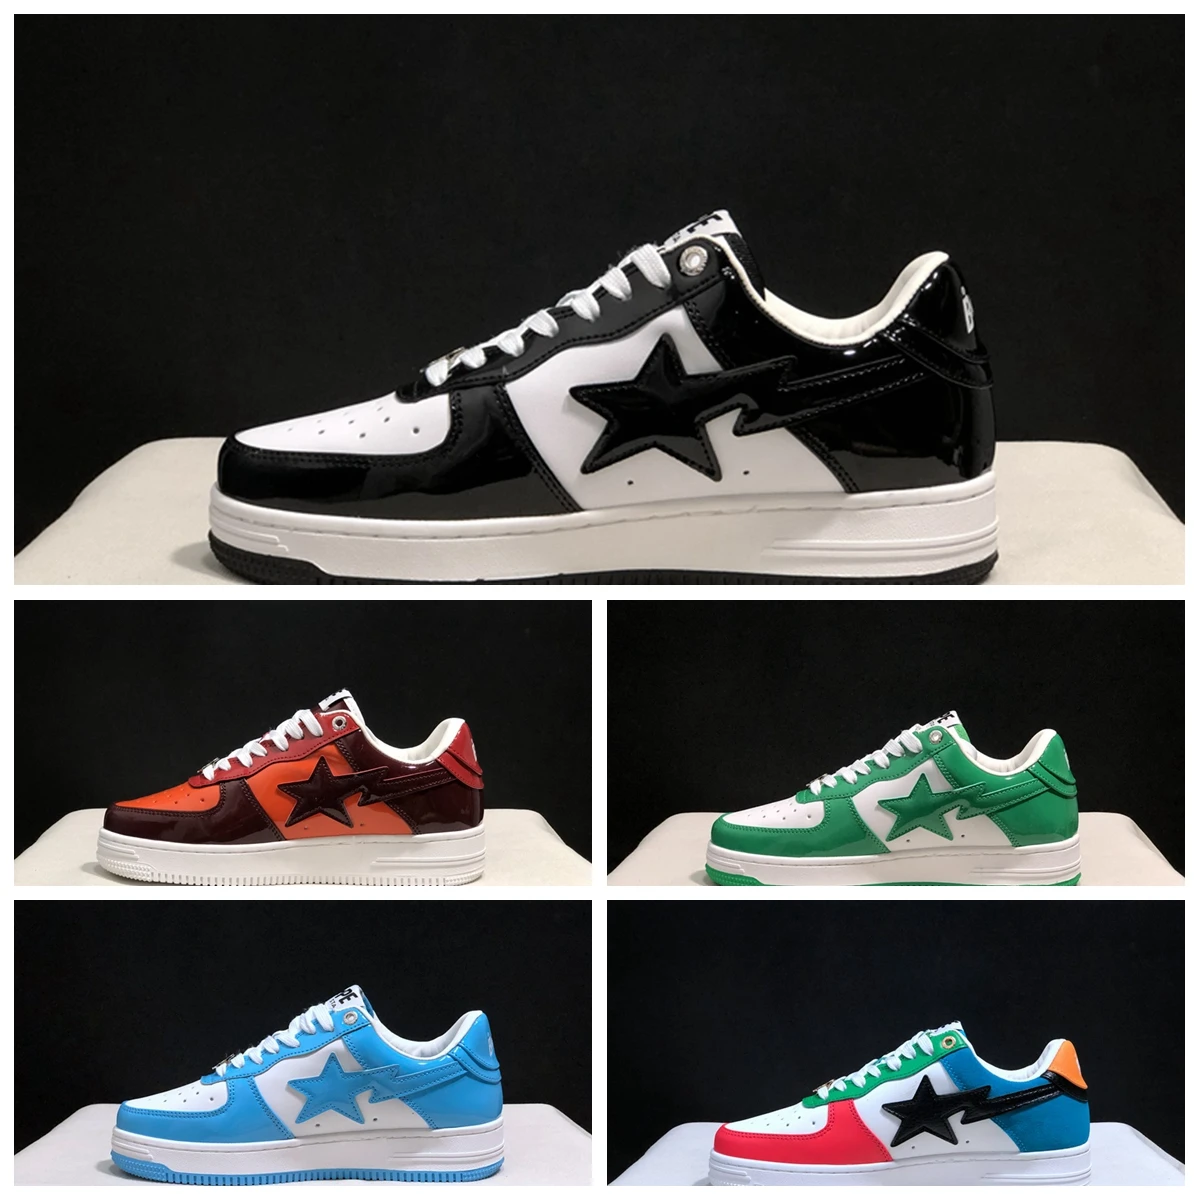 

2023 Bapesta Casual Shoes Woman Fashion Patent Leather Bapesta clgz Sneaker Black White Outdoor Trainers Plate-forme Sneakers